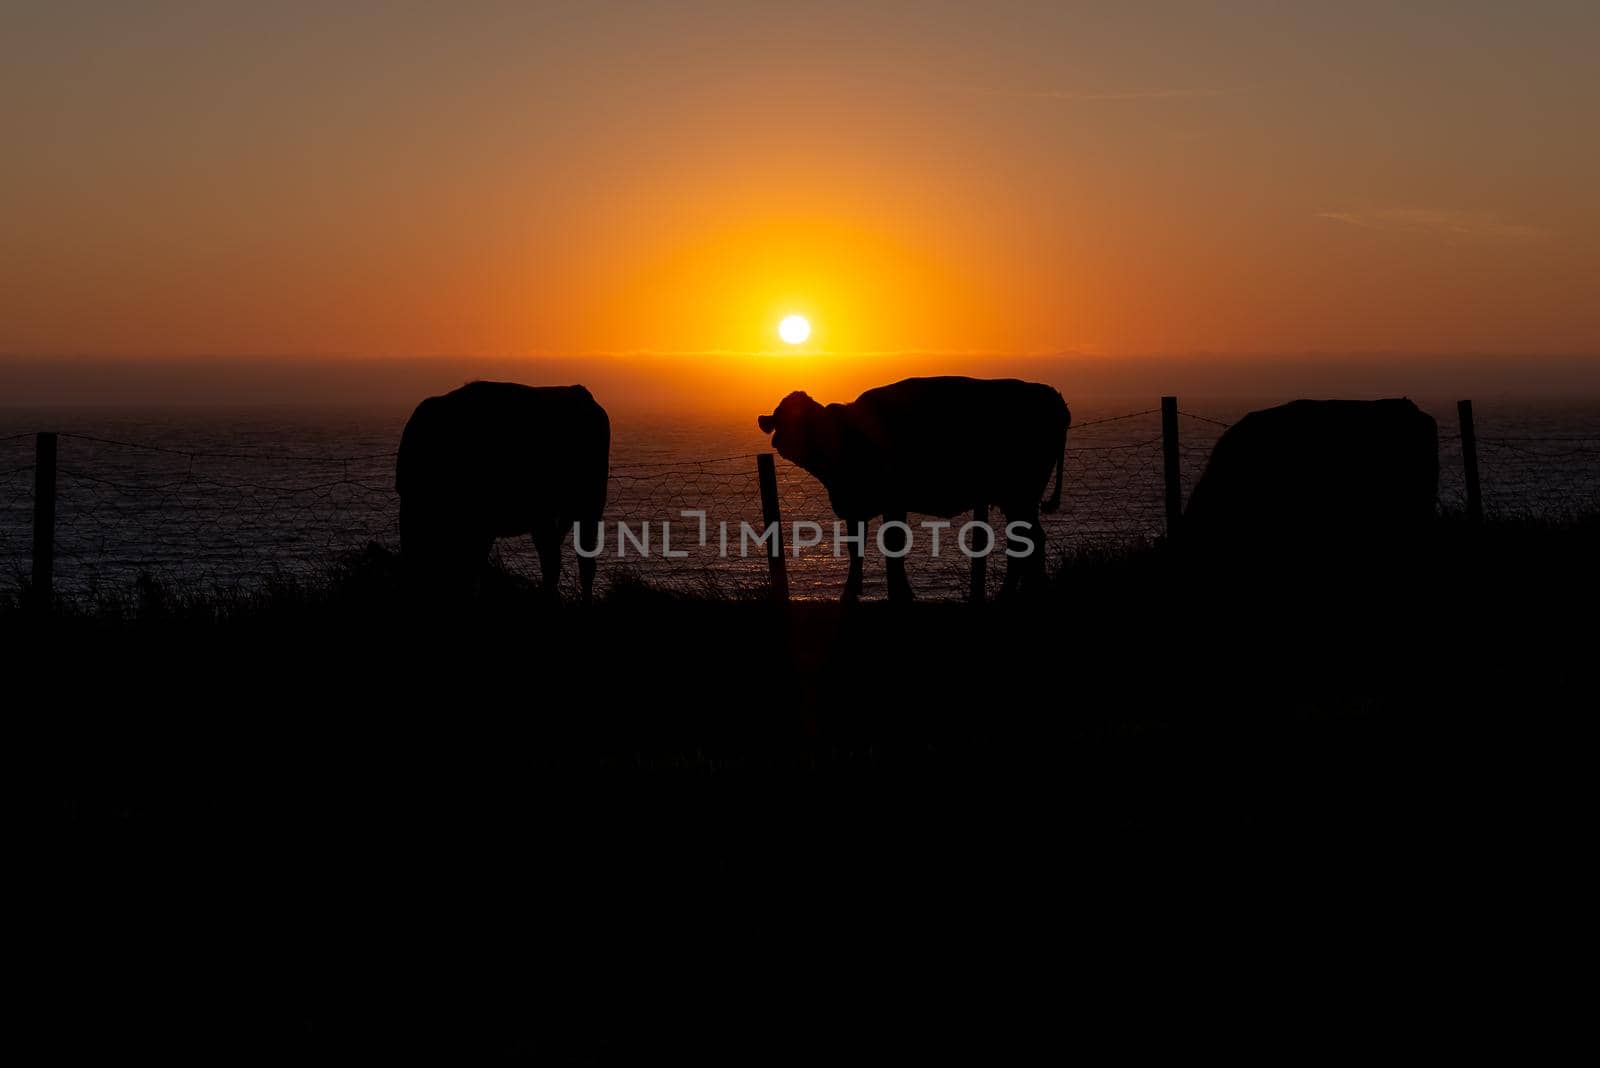 At Obrestad Lighthouse even the cows are enjoying the magnificient sunset :)